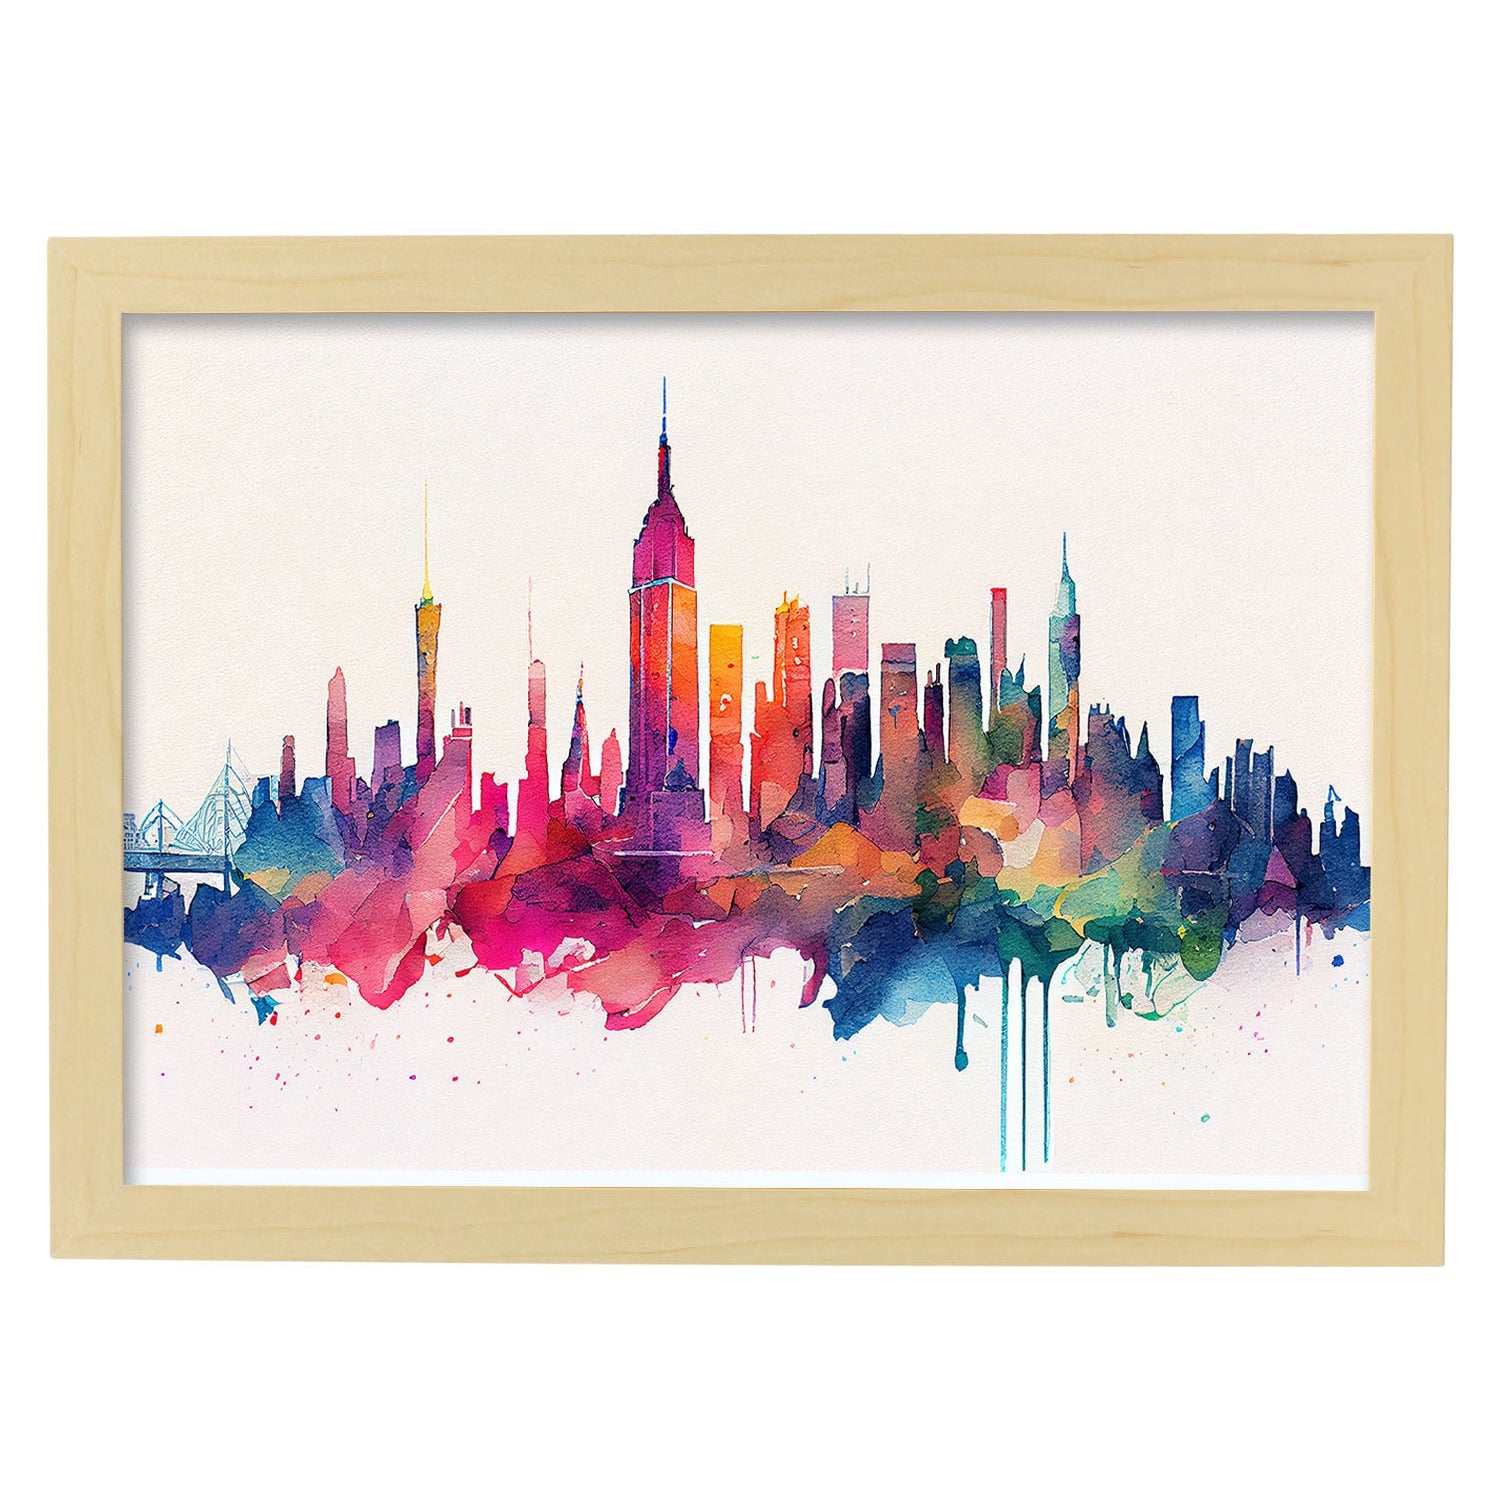 Nacnic watercolor of a skyline of the city of New York_2. Aesthetic Wall Art Prints for Bedroom or Living Room Design.-Artwork-Nacnic-A4-Marco Madera Clara-Nacnic Estudio SL